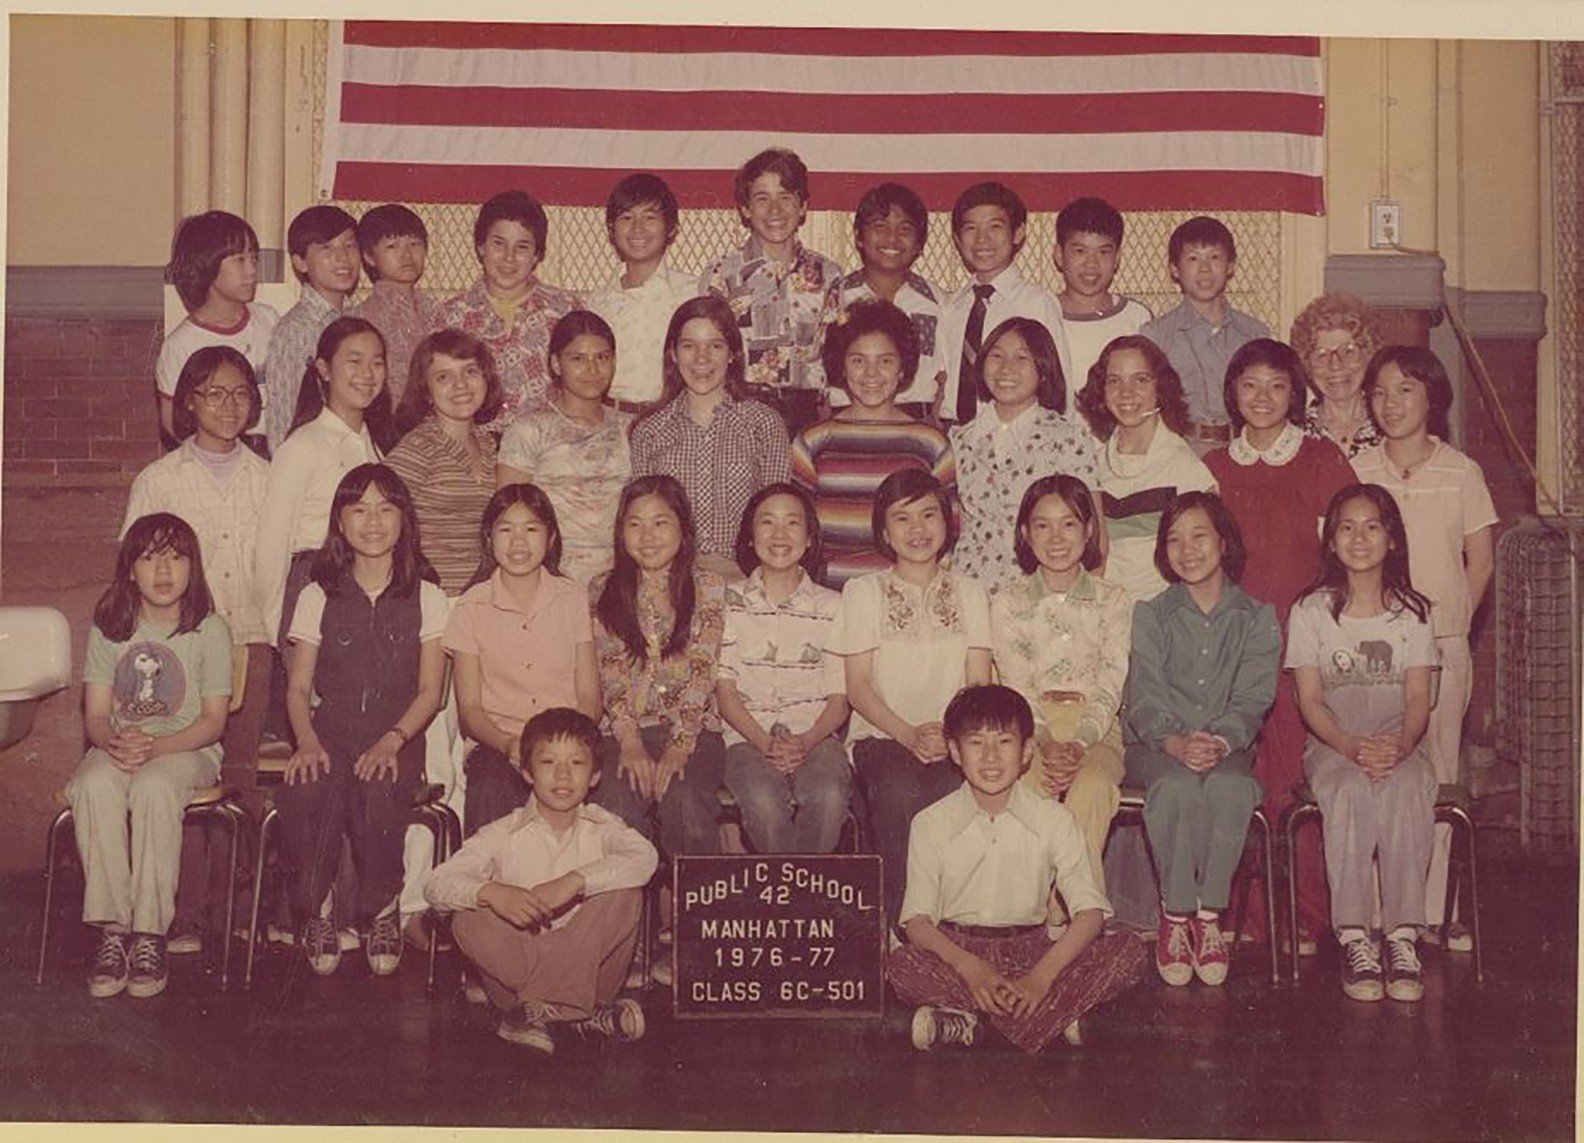 A diverse class of 31 students and one teacher. A sign in front reads, “Public School 42, Manhattan 1976-77, Class 6c-501.”